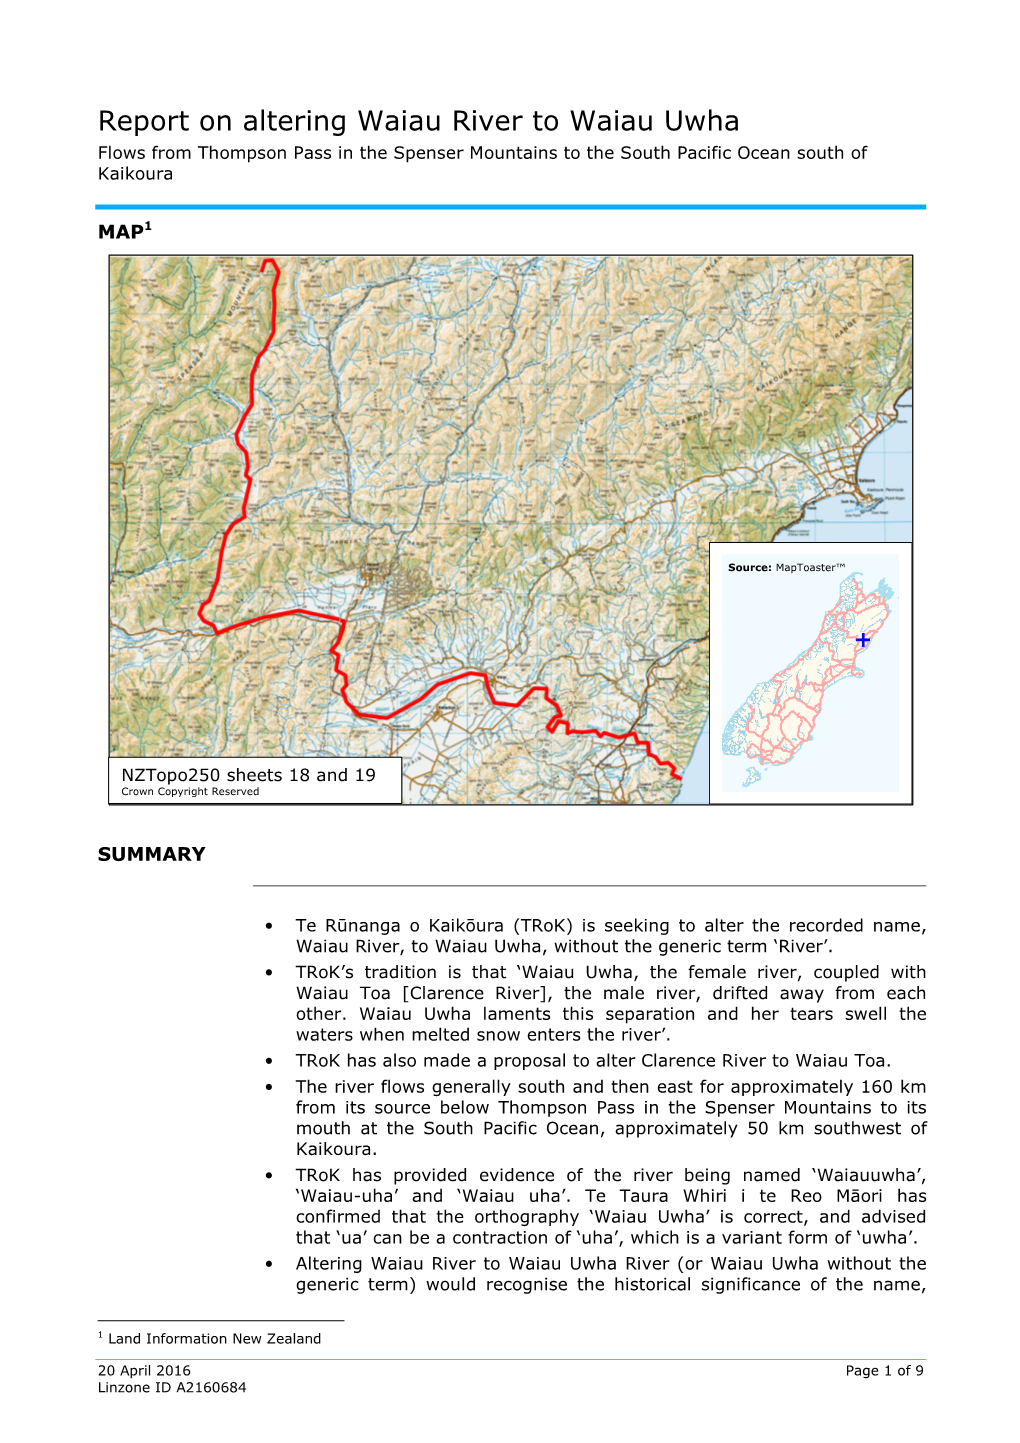 Report on Altering Waiau River to Waiau Uwha Flows from Thompson Pass in the Spenser Mountains to the South Pacific Ocean South of Kaikoura